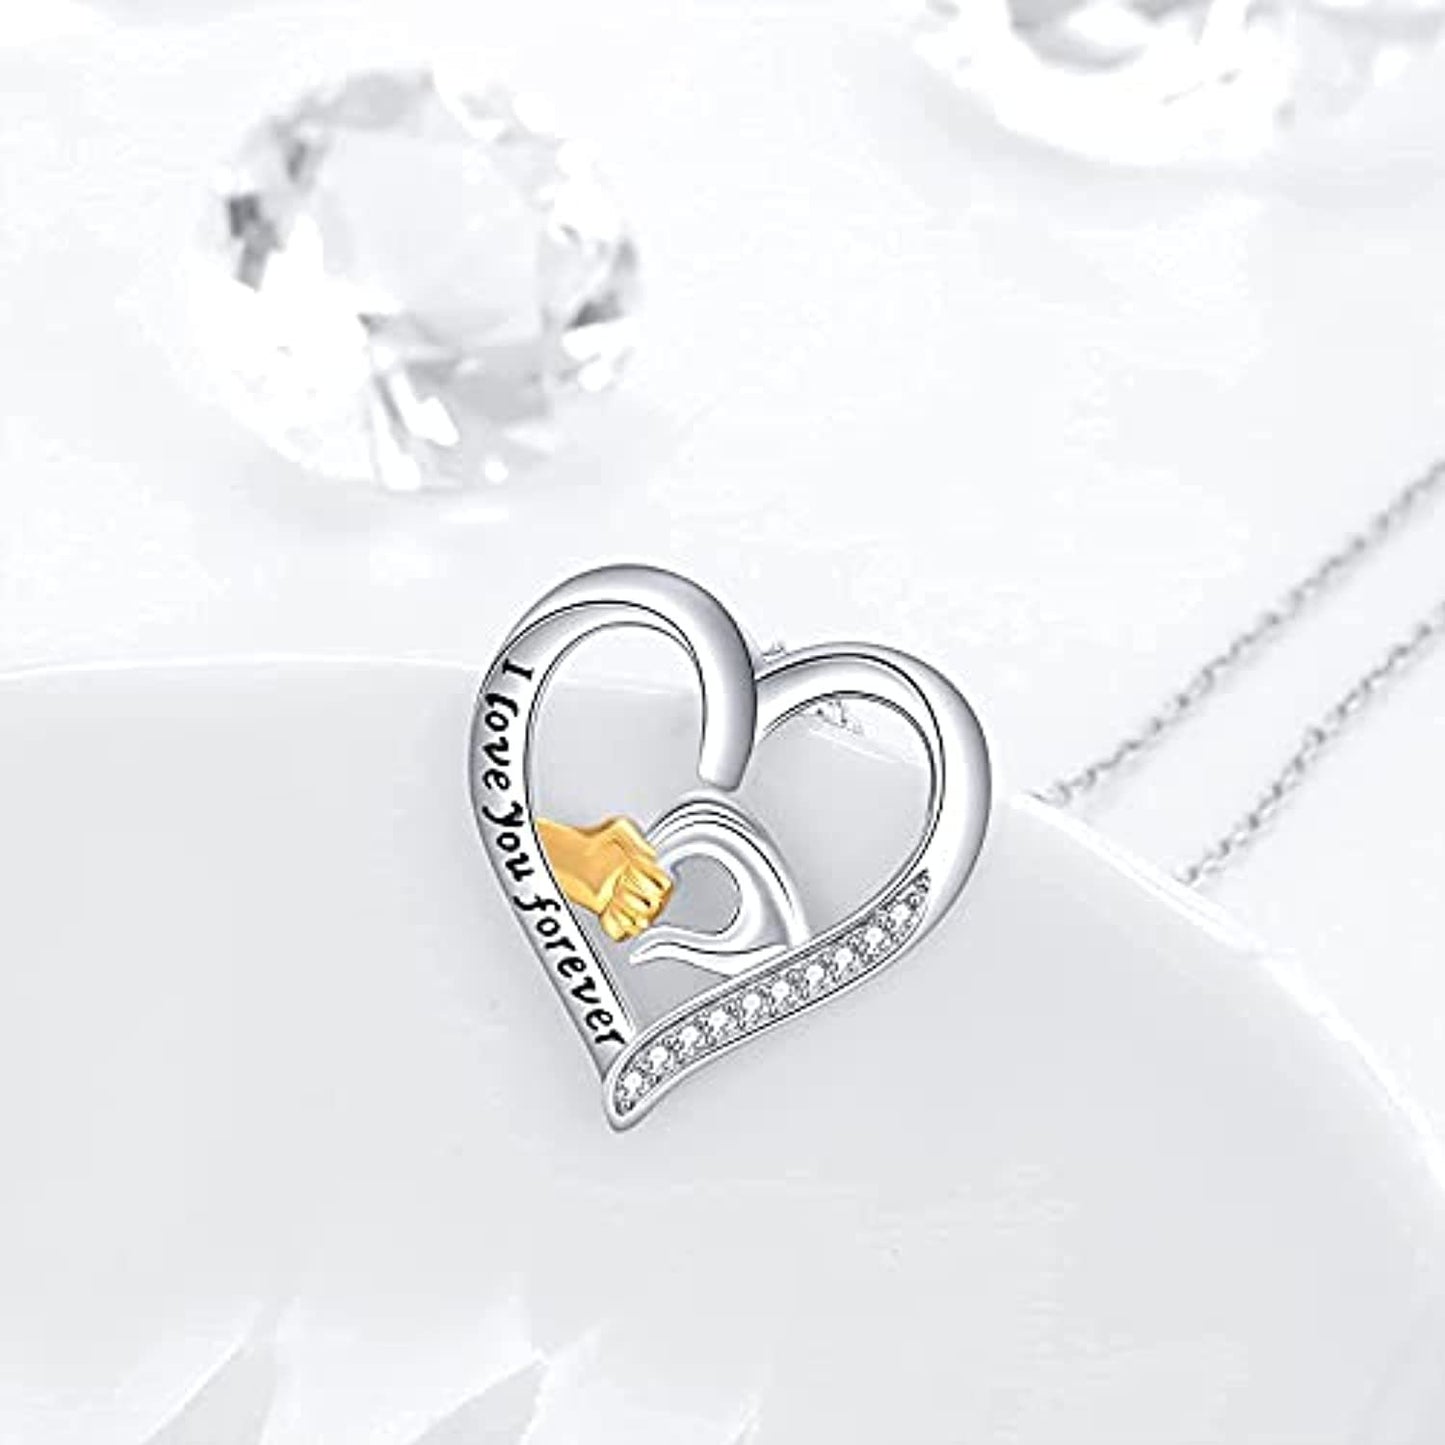 YFN Mother and Child Hands Love Heart Pendant Necklace Jewelry for Women I Love You Forever (US only)